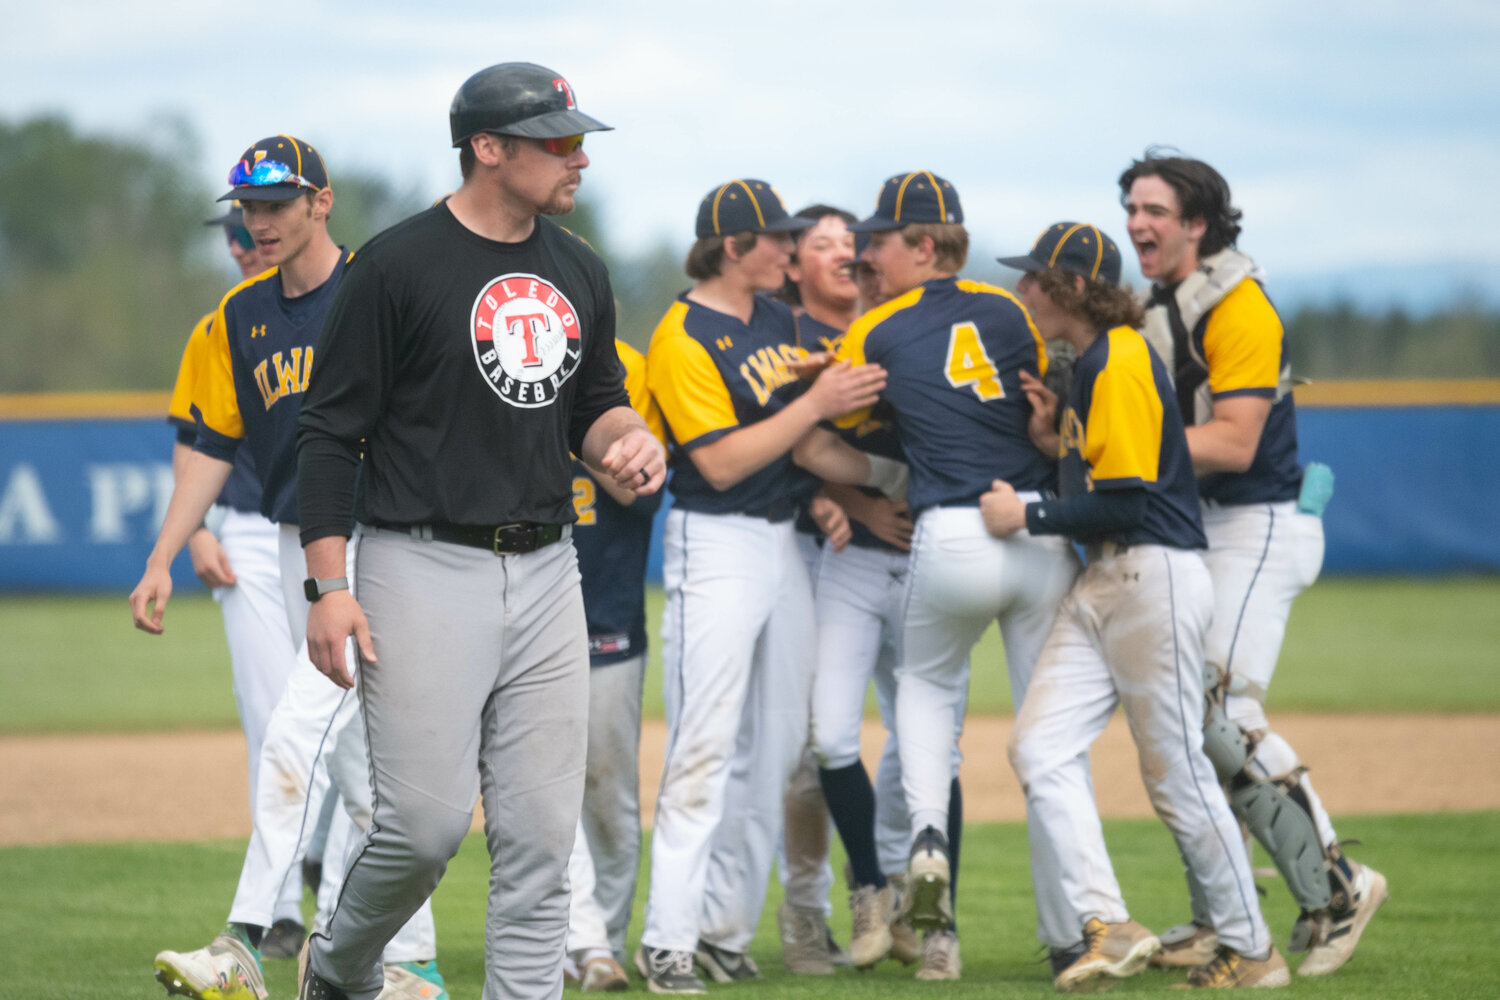 Toledo coach Mack Gaul walks past Ilwaco's celebration after the final out of the Fishermen's 5-4 win over the Riverhawks on May 9 at Adna in the 2B district semifinals.